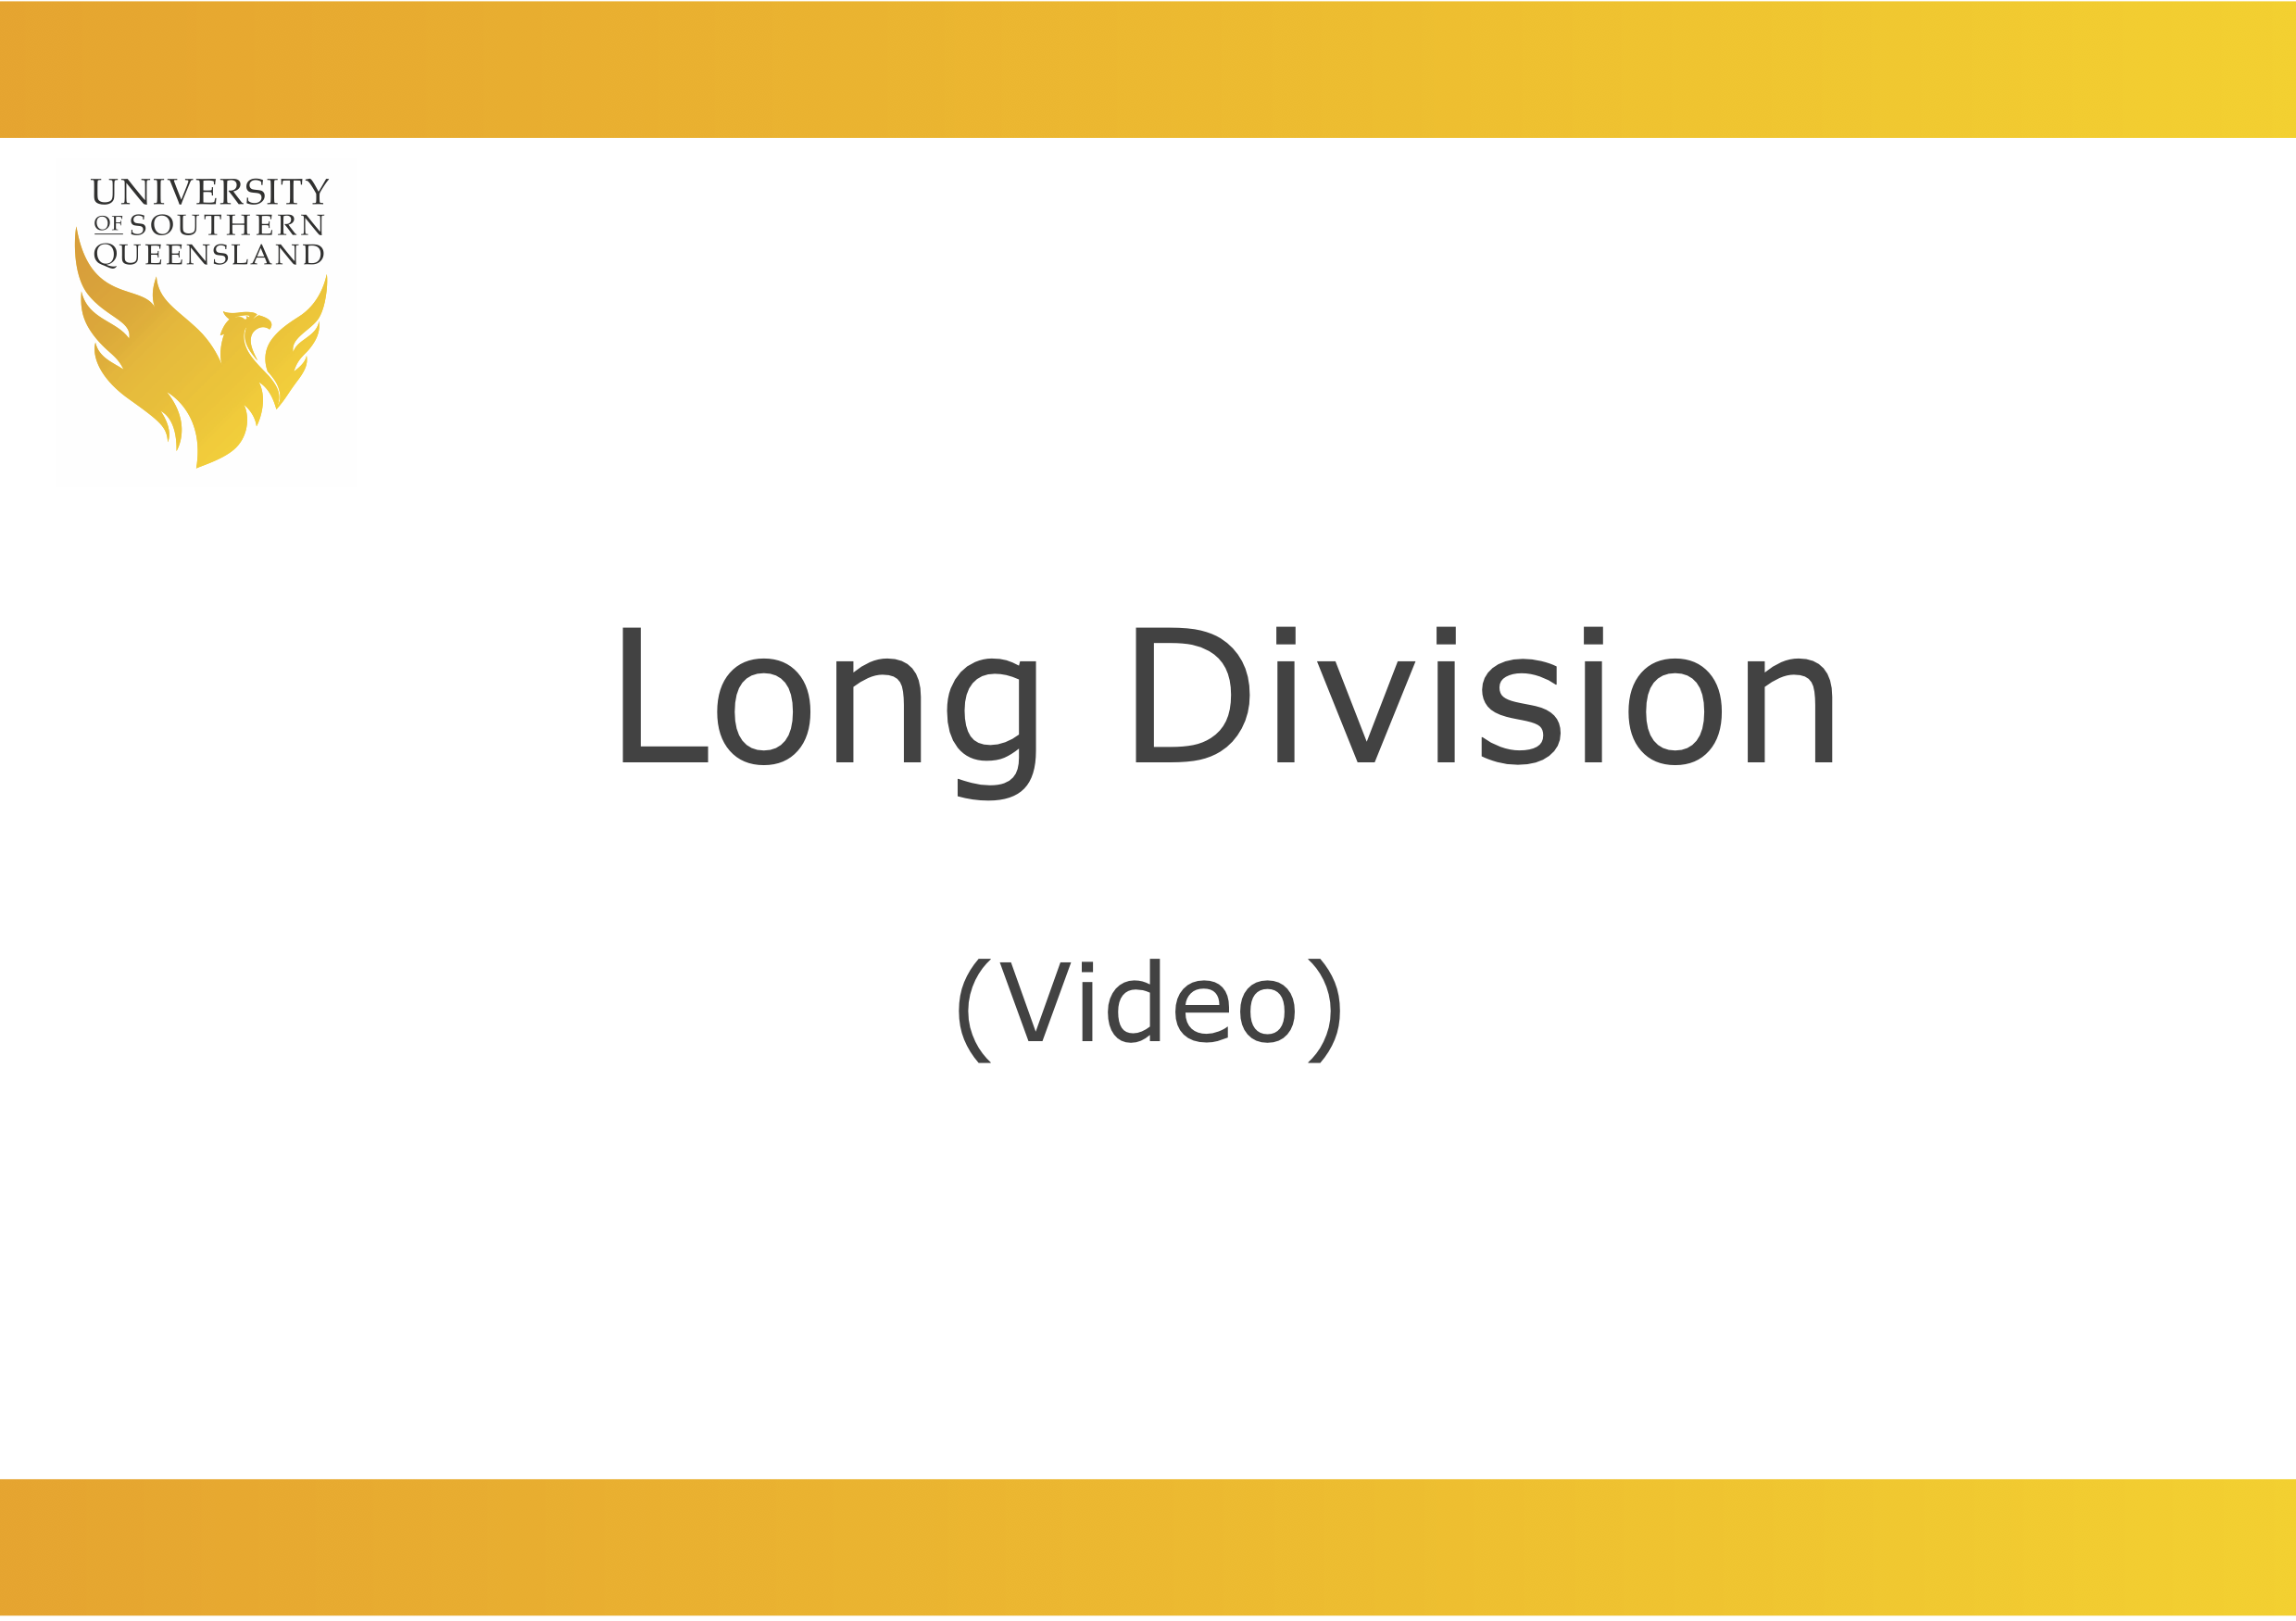 Image to click on to run the video for the long division example.